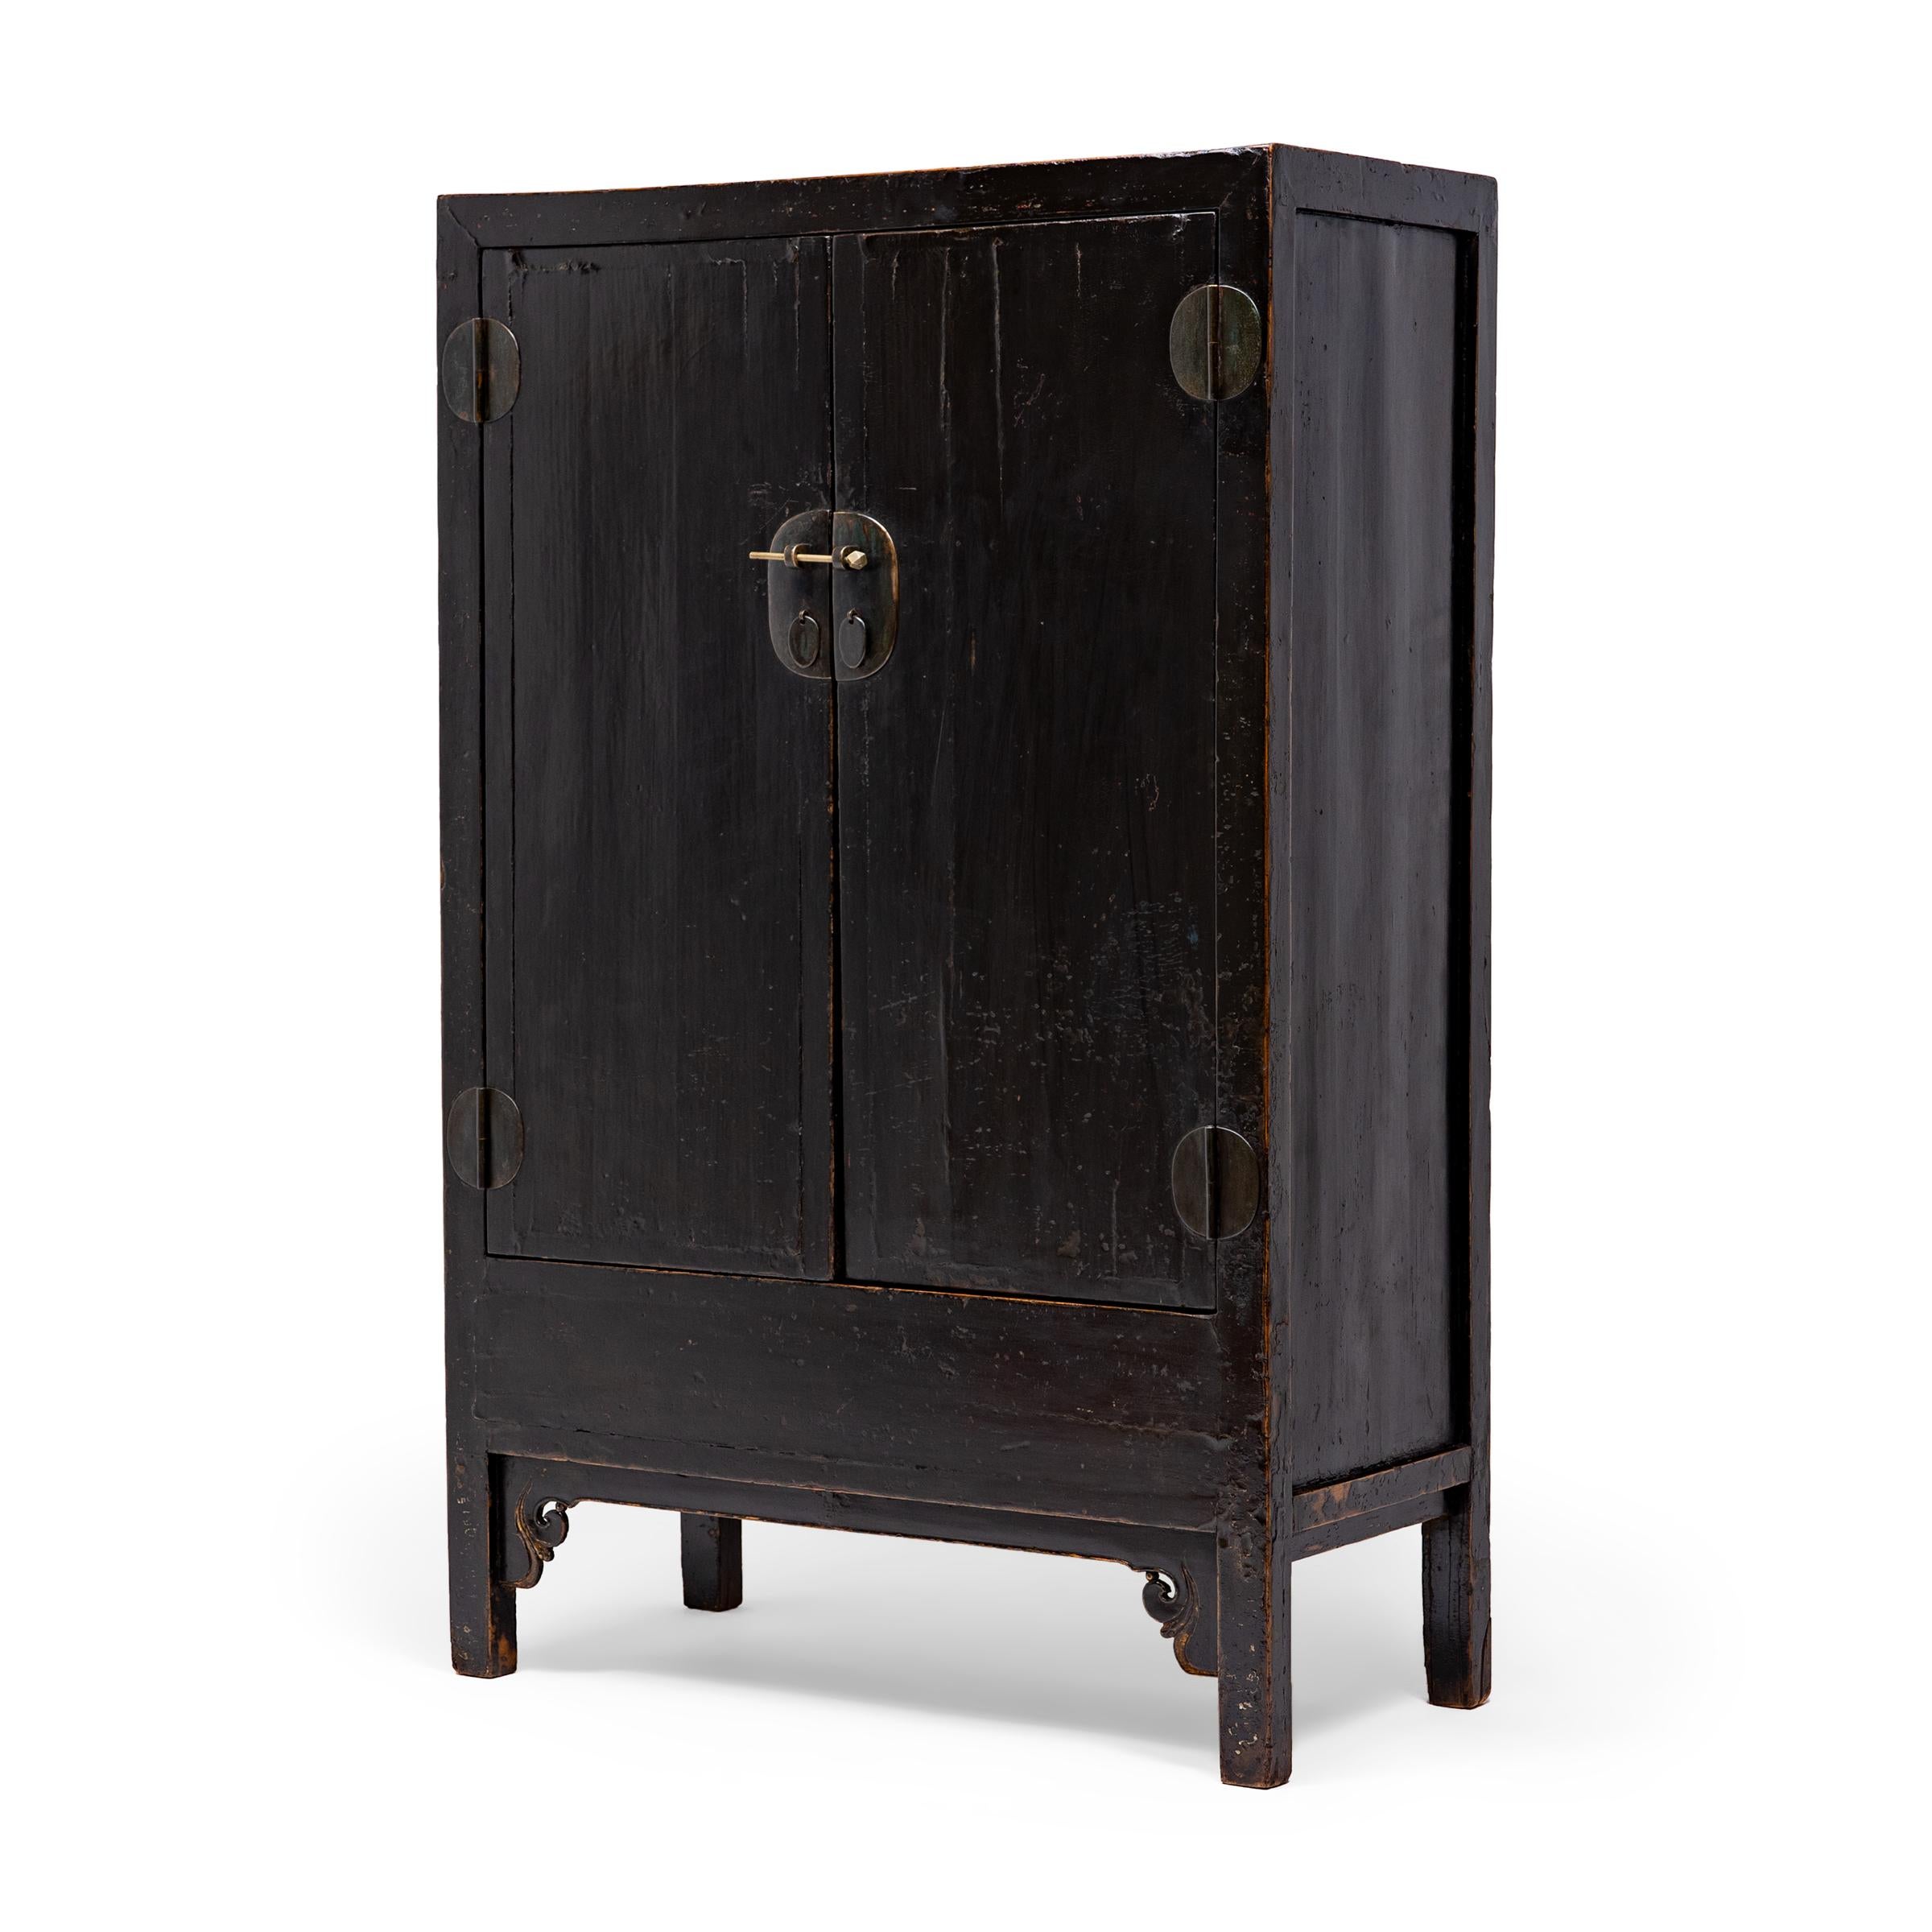 Qing Chinese Black Lacquer Square Corner Cabinet, c. 1850 For Sale